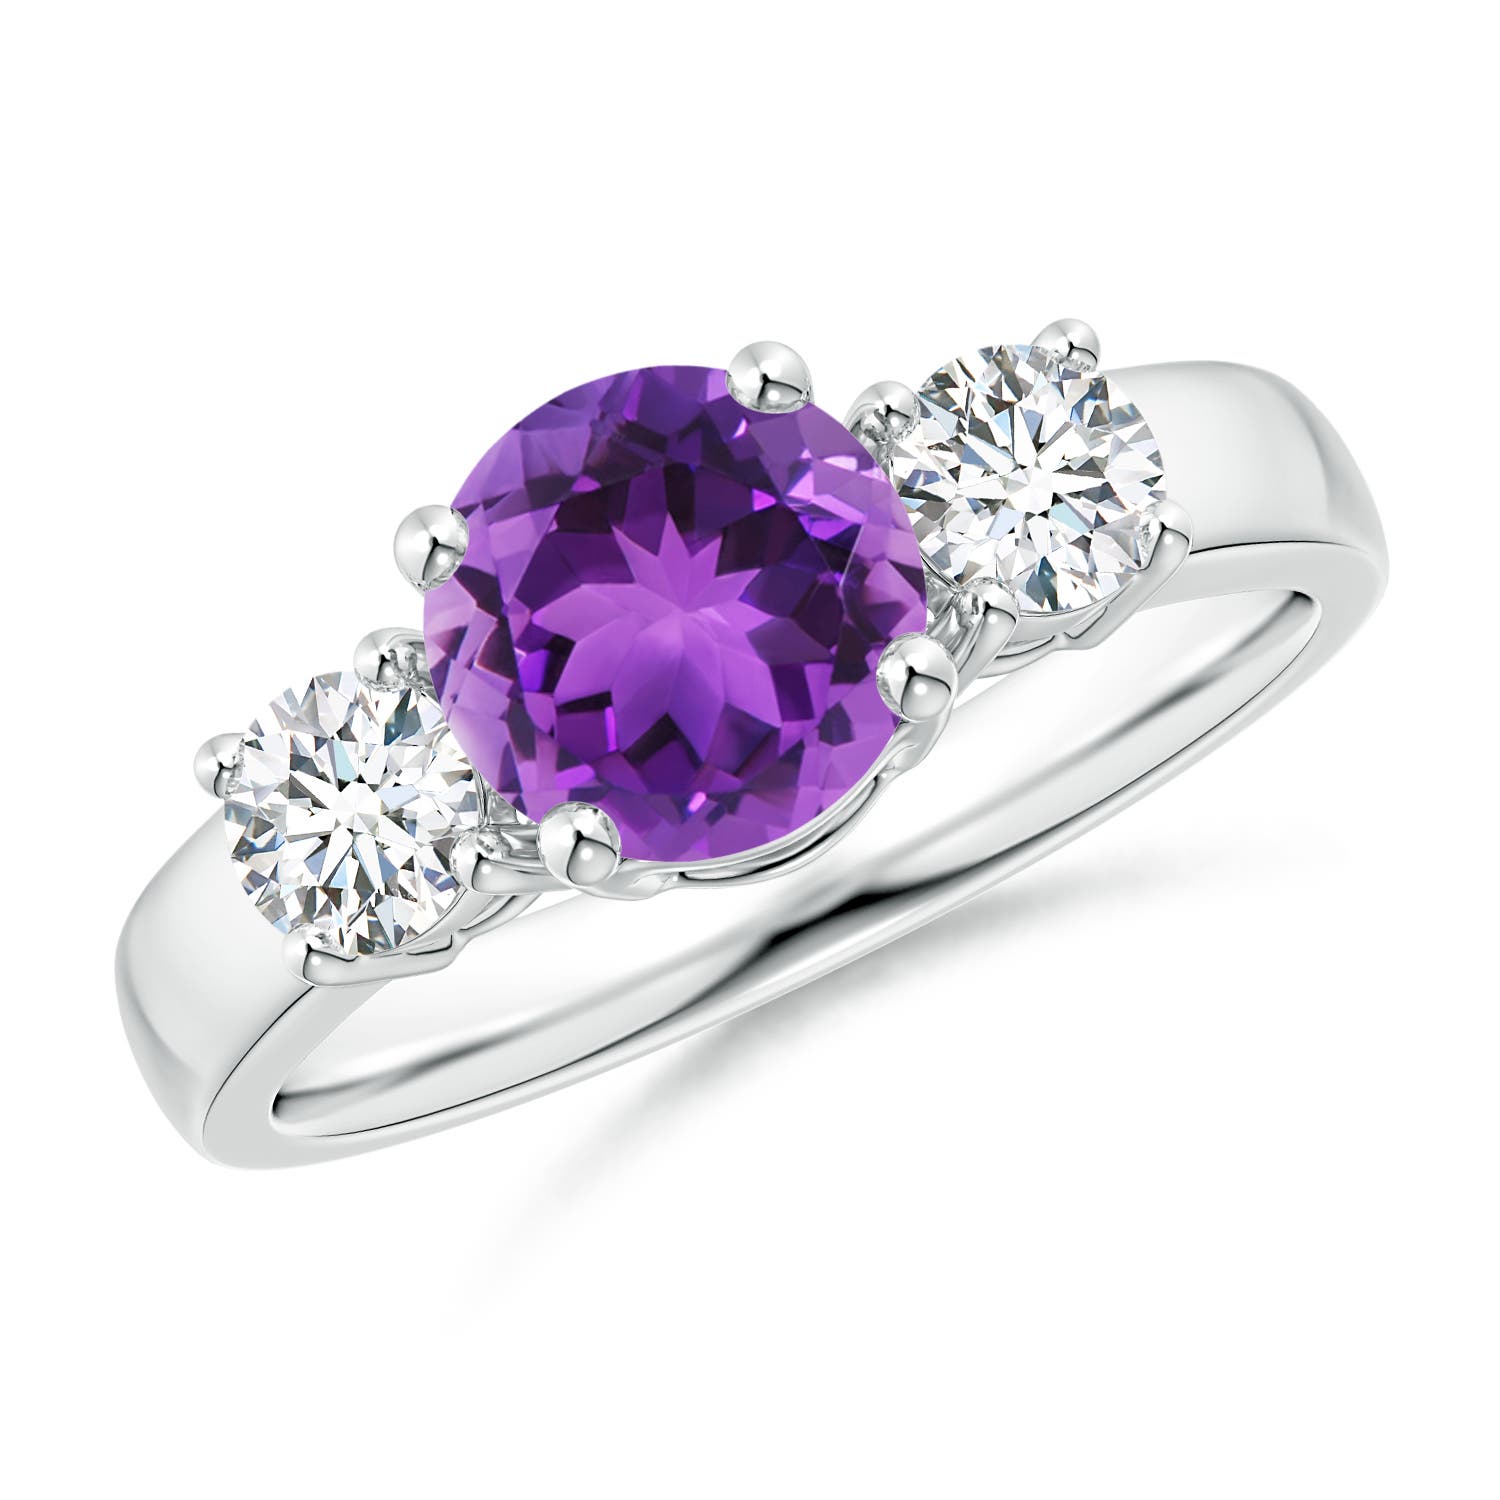 AAA - Amethyst / 1.61 CT / 14 KT White Gold